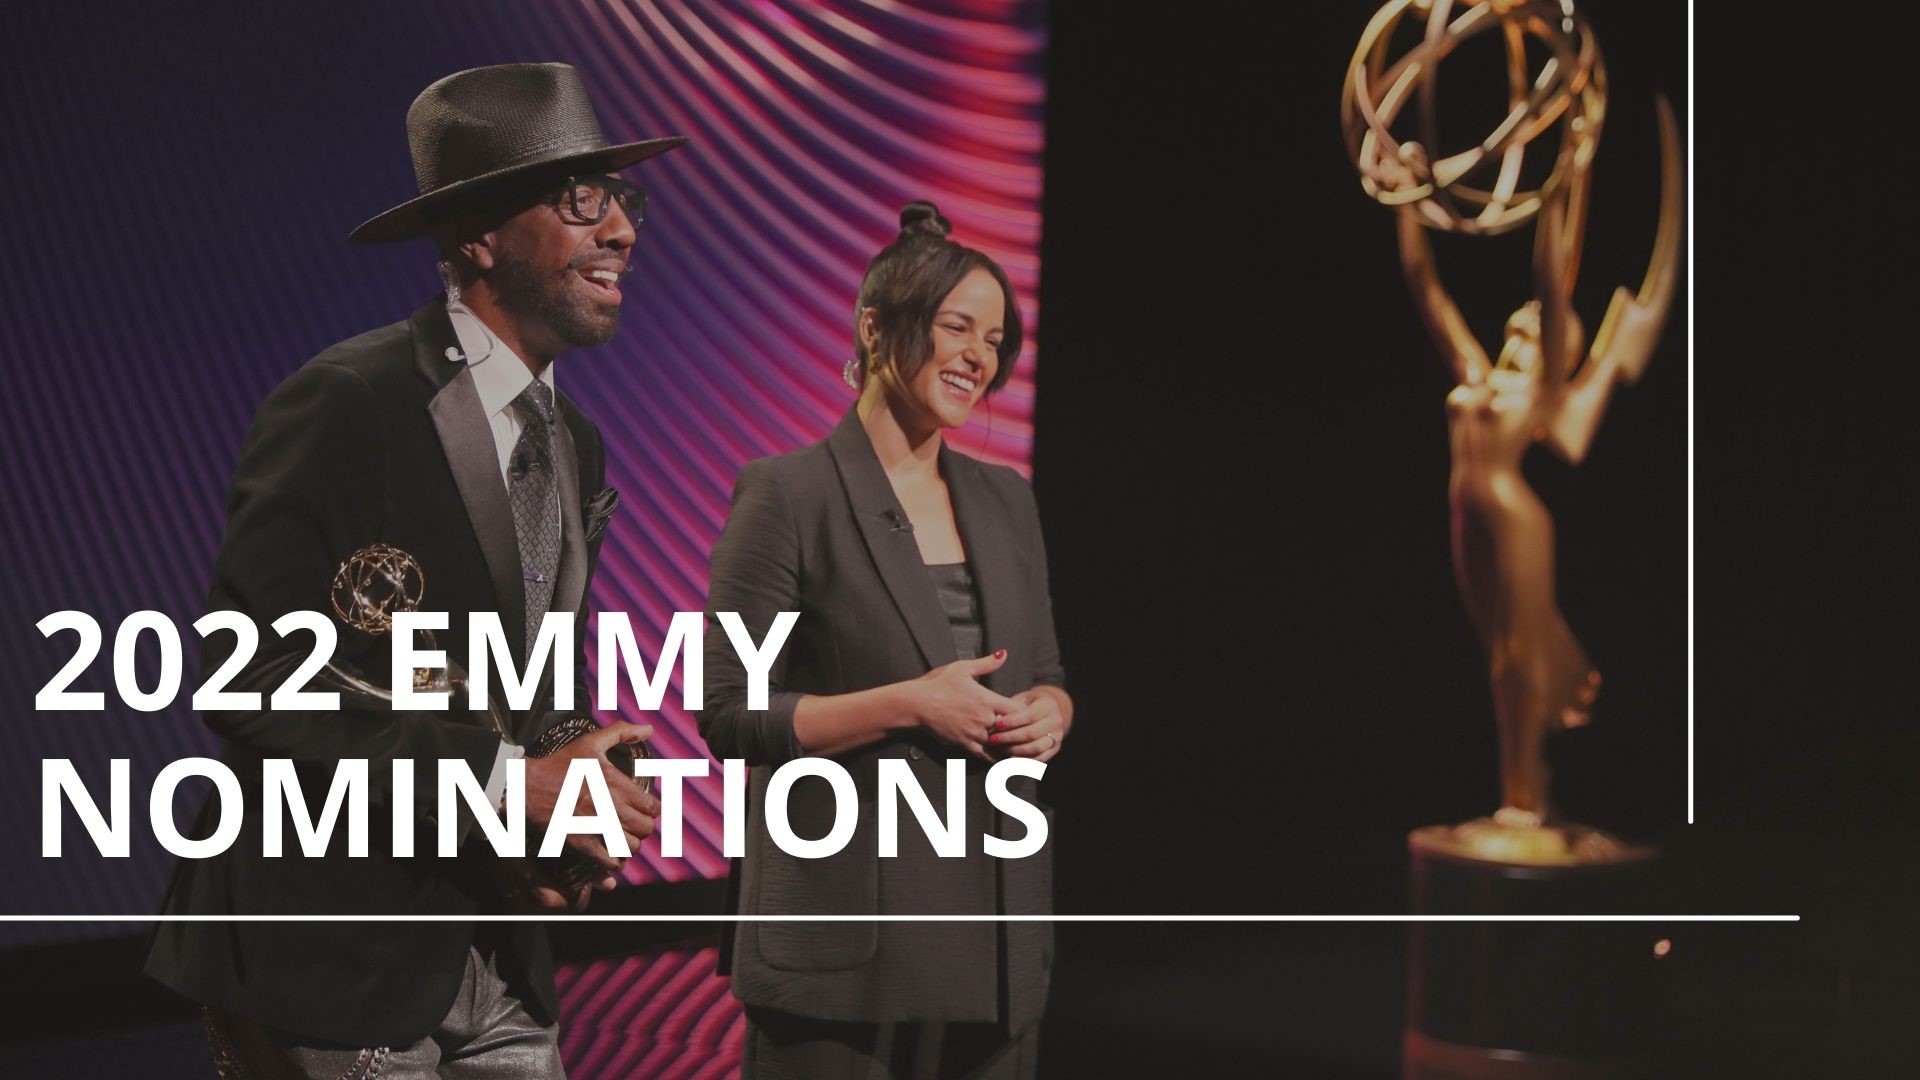 Melissa Fumero and JB Smoove announce the nominees for the 2022 Emmy Awards. 'Succession' and 'Squid Game' led the way in nominations